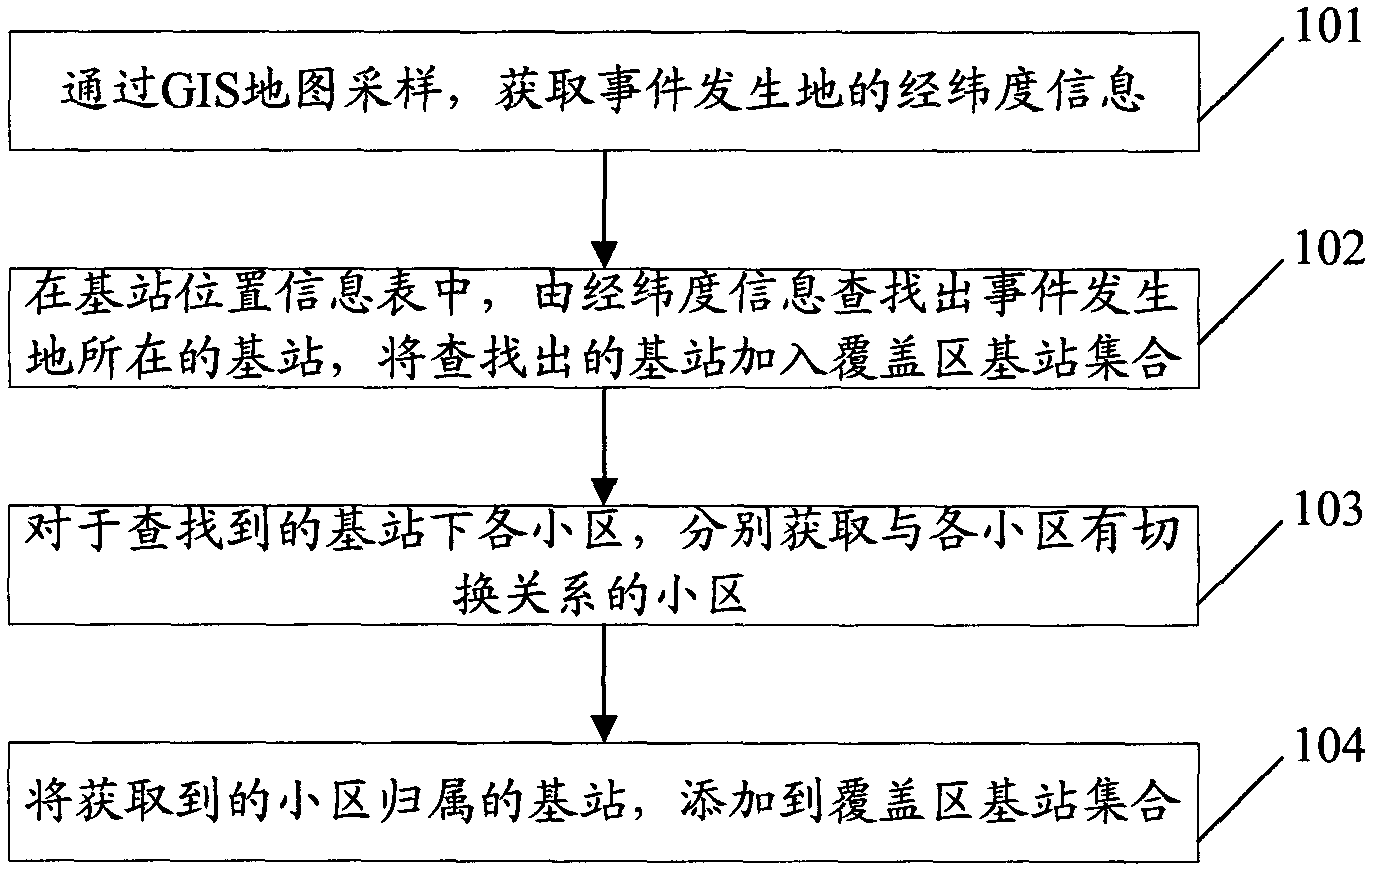 Method and device for searching coverage area base station by using geographic information system